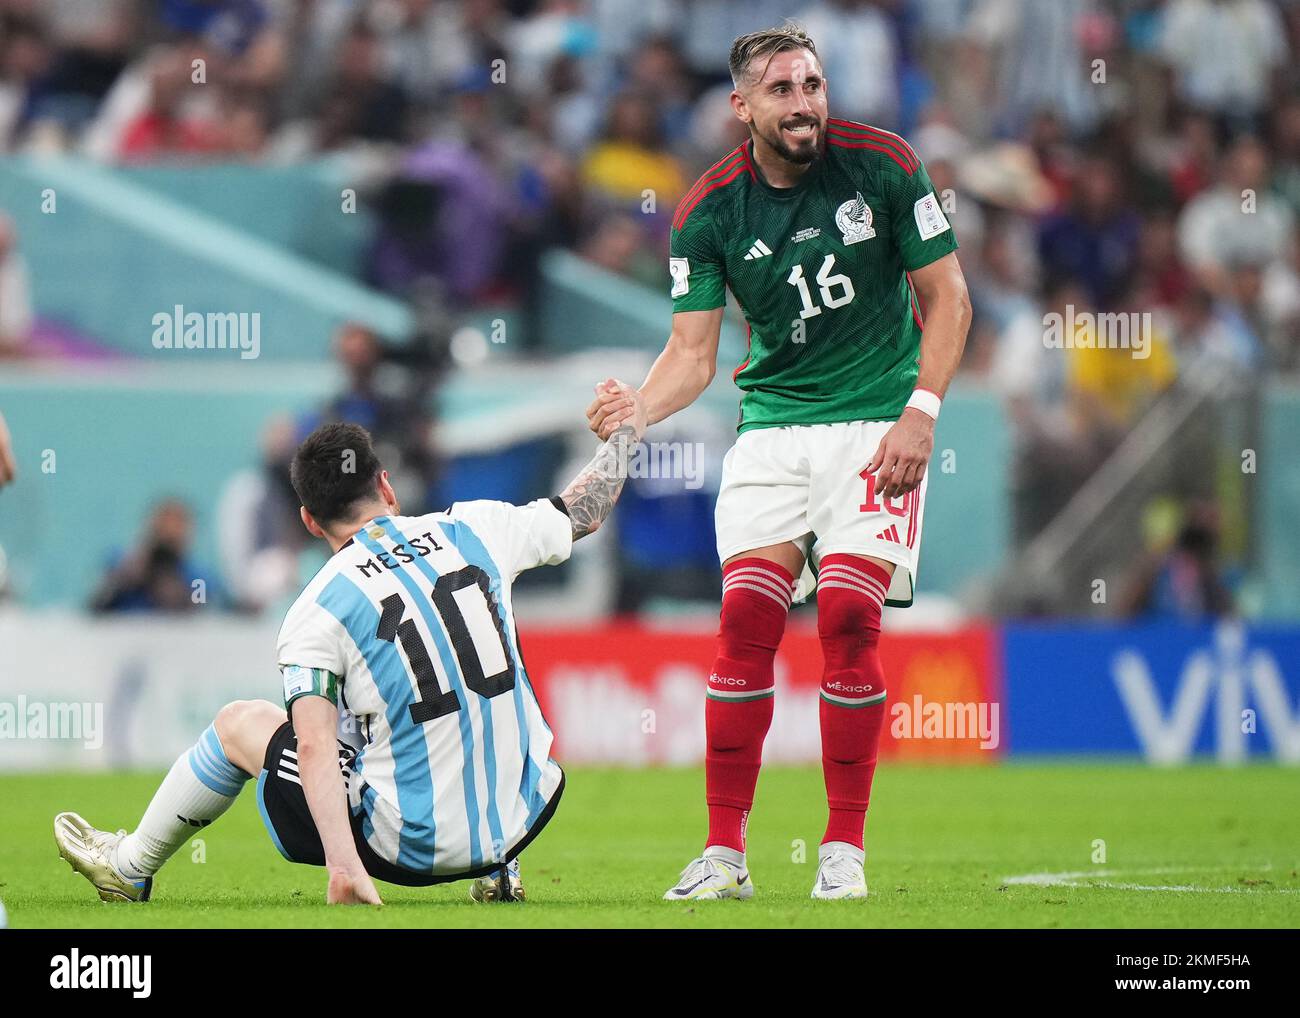 Lionel Messi of Argentina and Hector Herrera of Mexico during the FIFA World Cup Qatar 2022 match, Group C, between Argentina and Mexico played at Lusail Stadium on Nov 26, 2022 in Lusail, Qatar. (Photo by Bagu Blanco / PRESSIN) Credit: PRESSINPHOTO SPORTS AGENCY/Alamy Live News Stock Photo